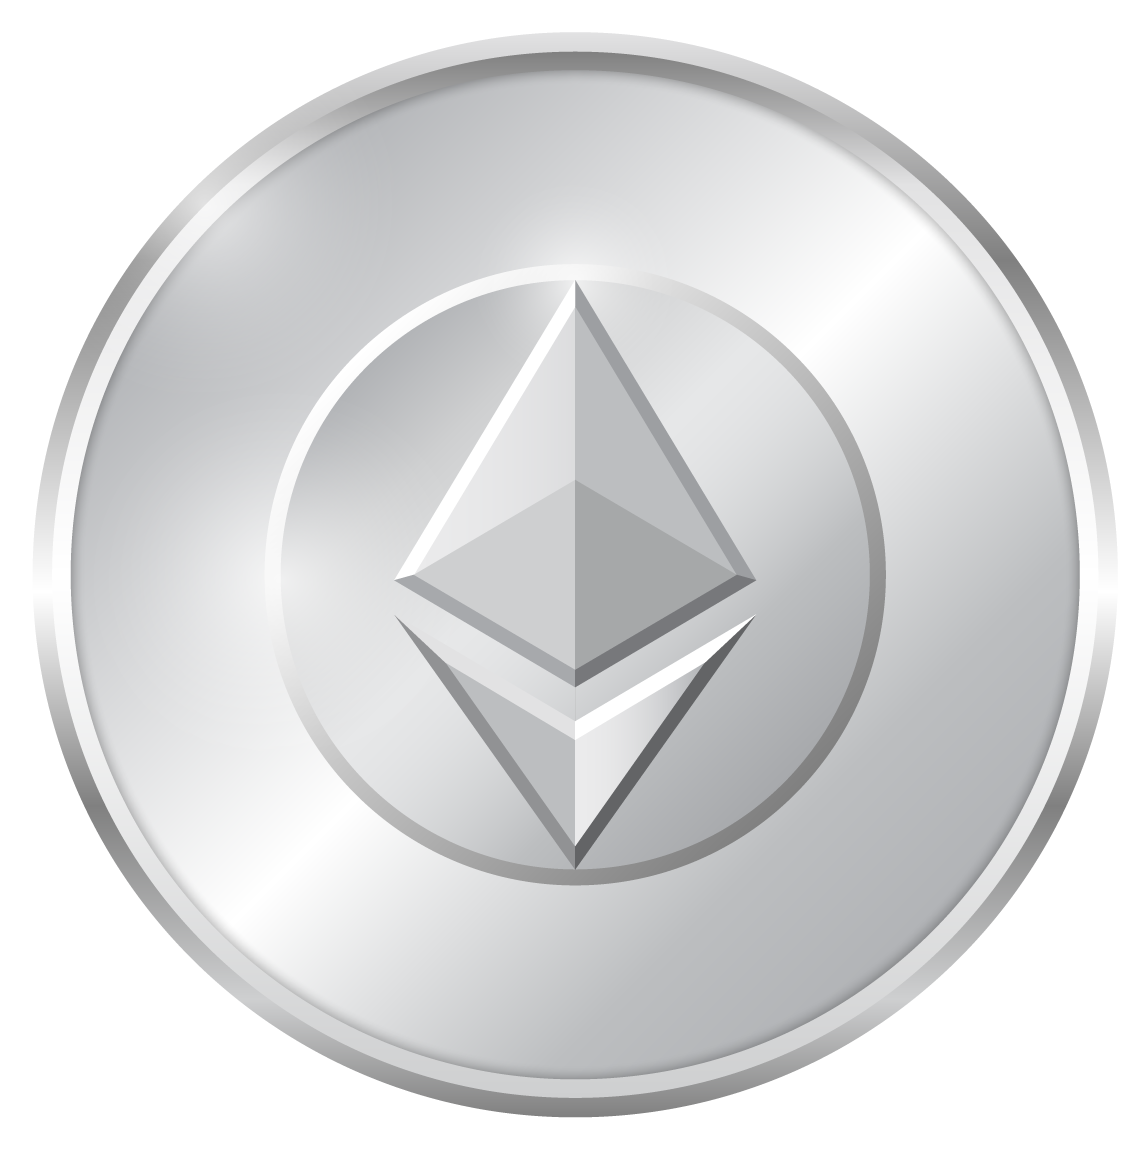 Cryptocurrency Blockchain Ethereum Airdrop Bitcoin PNG Free Photo Clipart